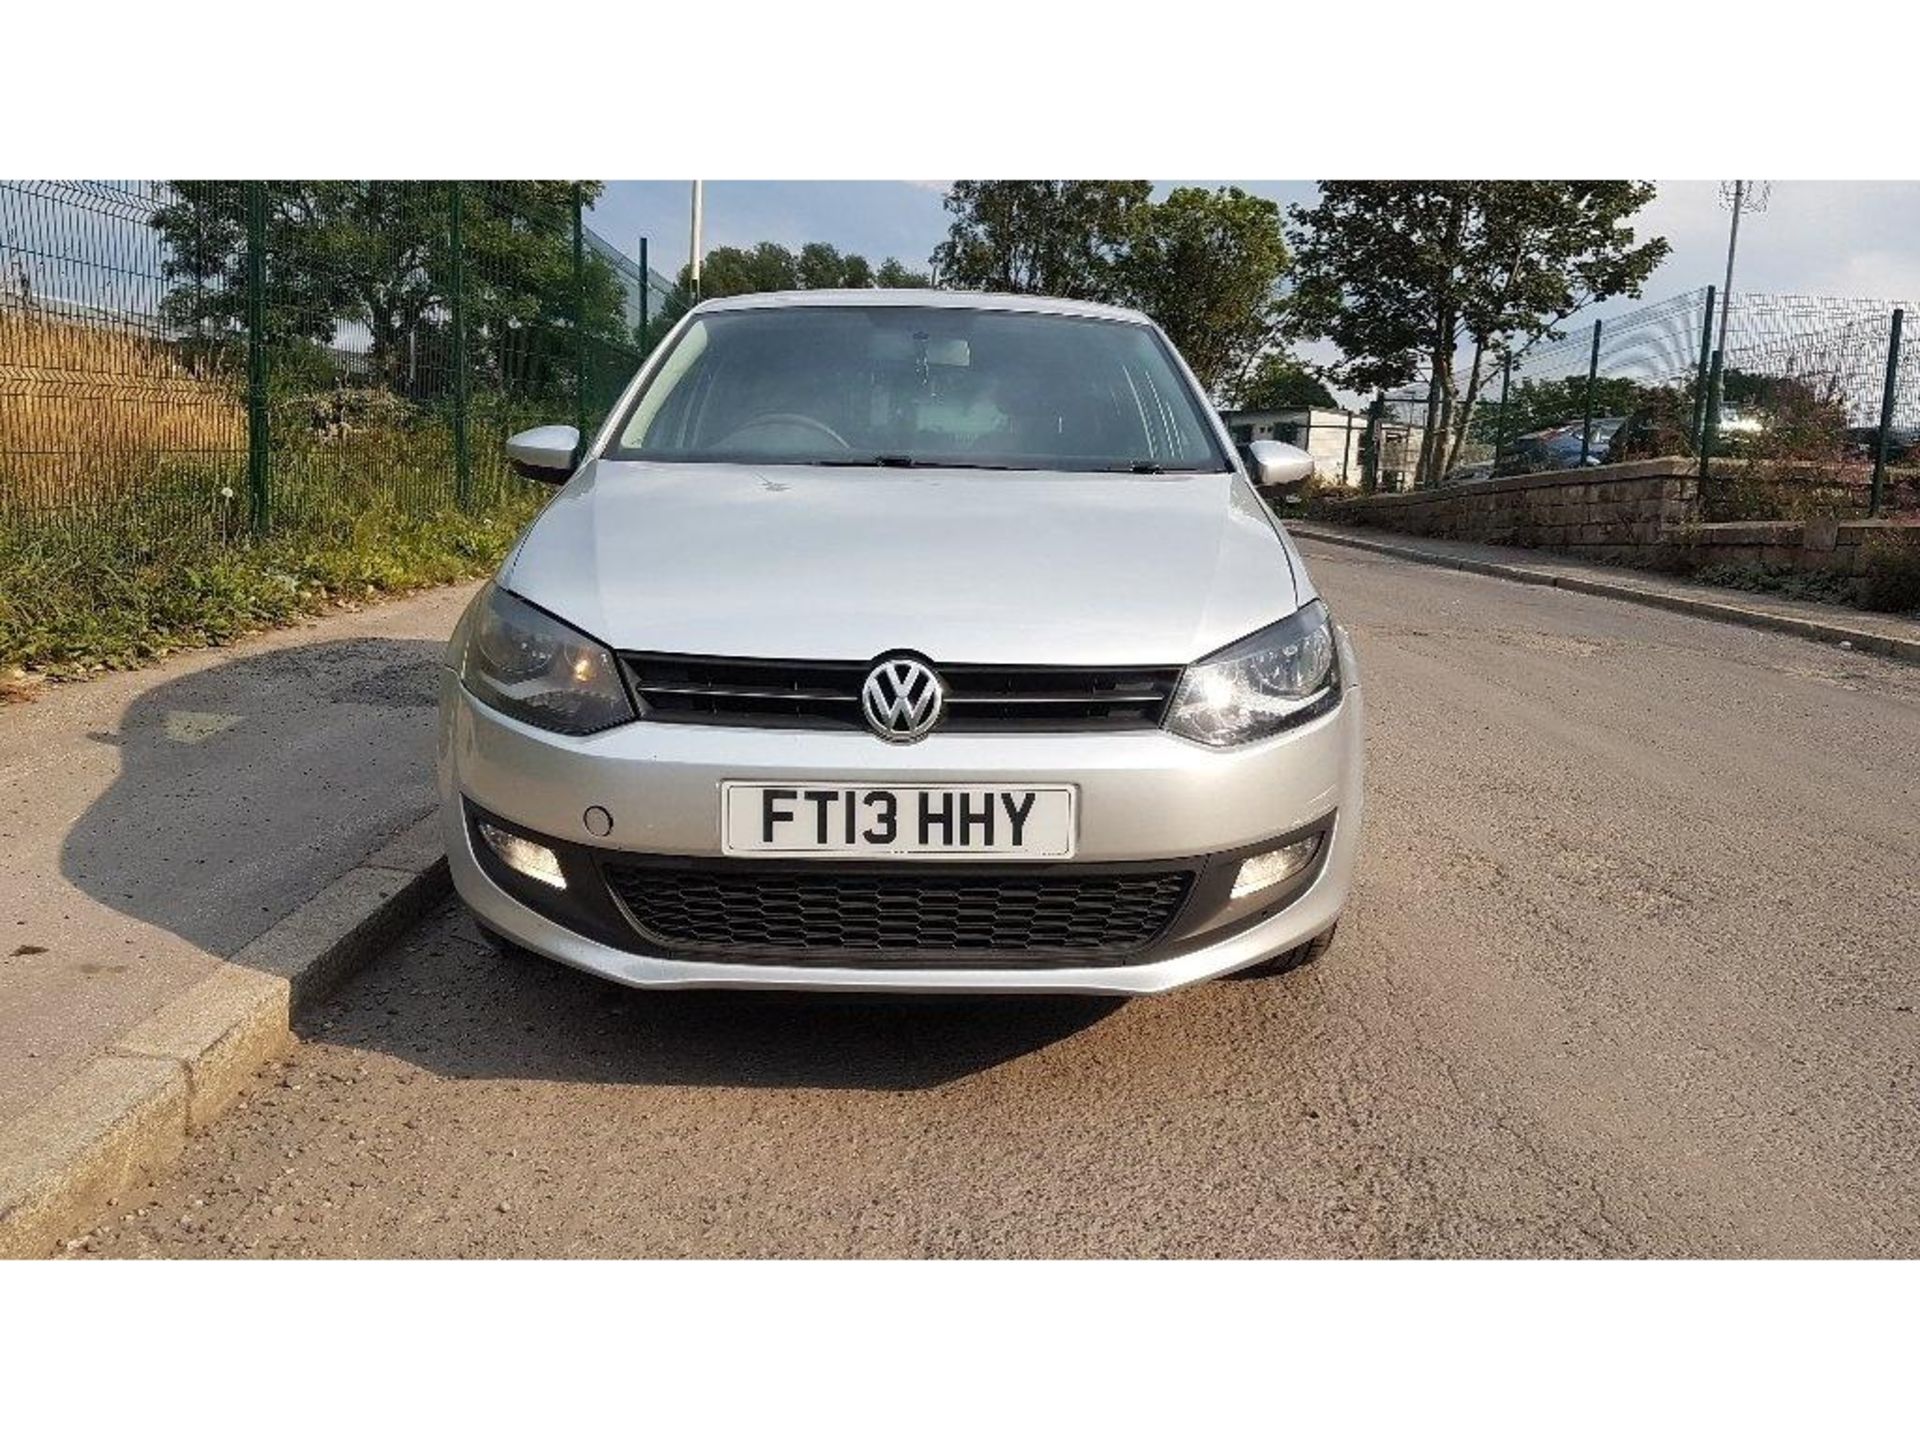 VOLKSWAGEN POLO 1.2 MATCH EDITION 5DR, FT13 HHY, 20.05.2013, PETROL, MILEAGE 28,499, MANUAL, 1.2L, 2 - Image 18 of 19